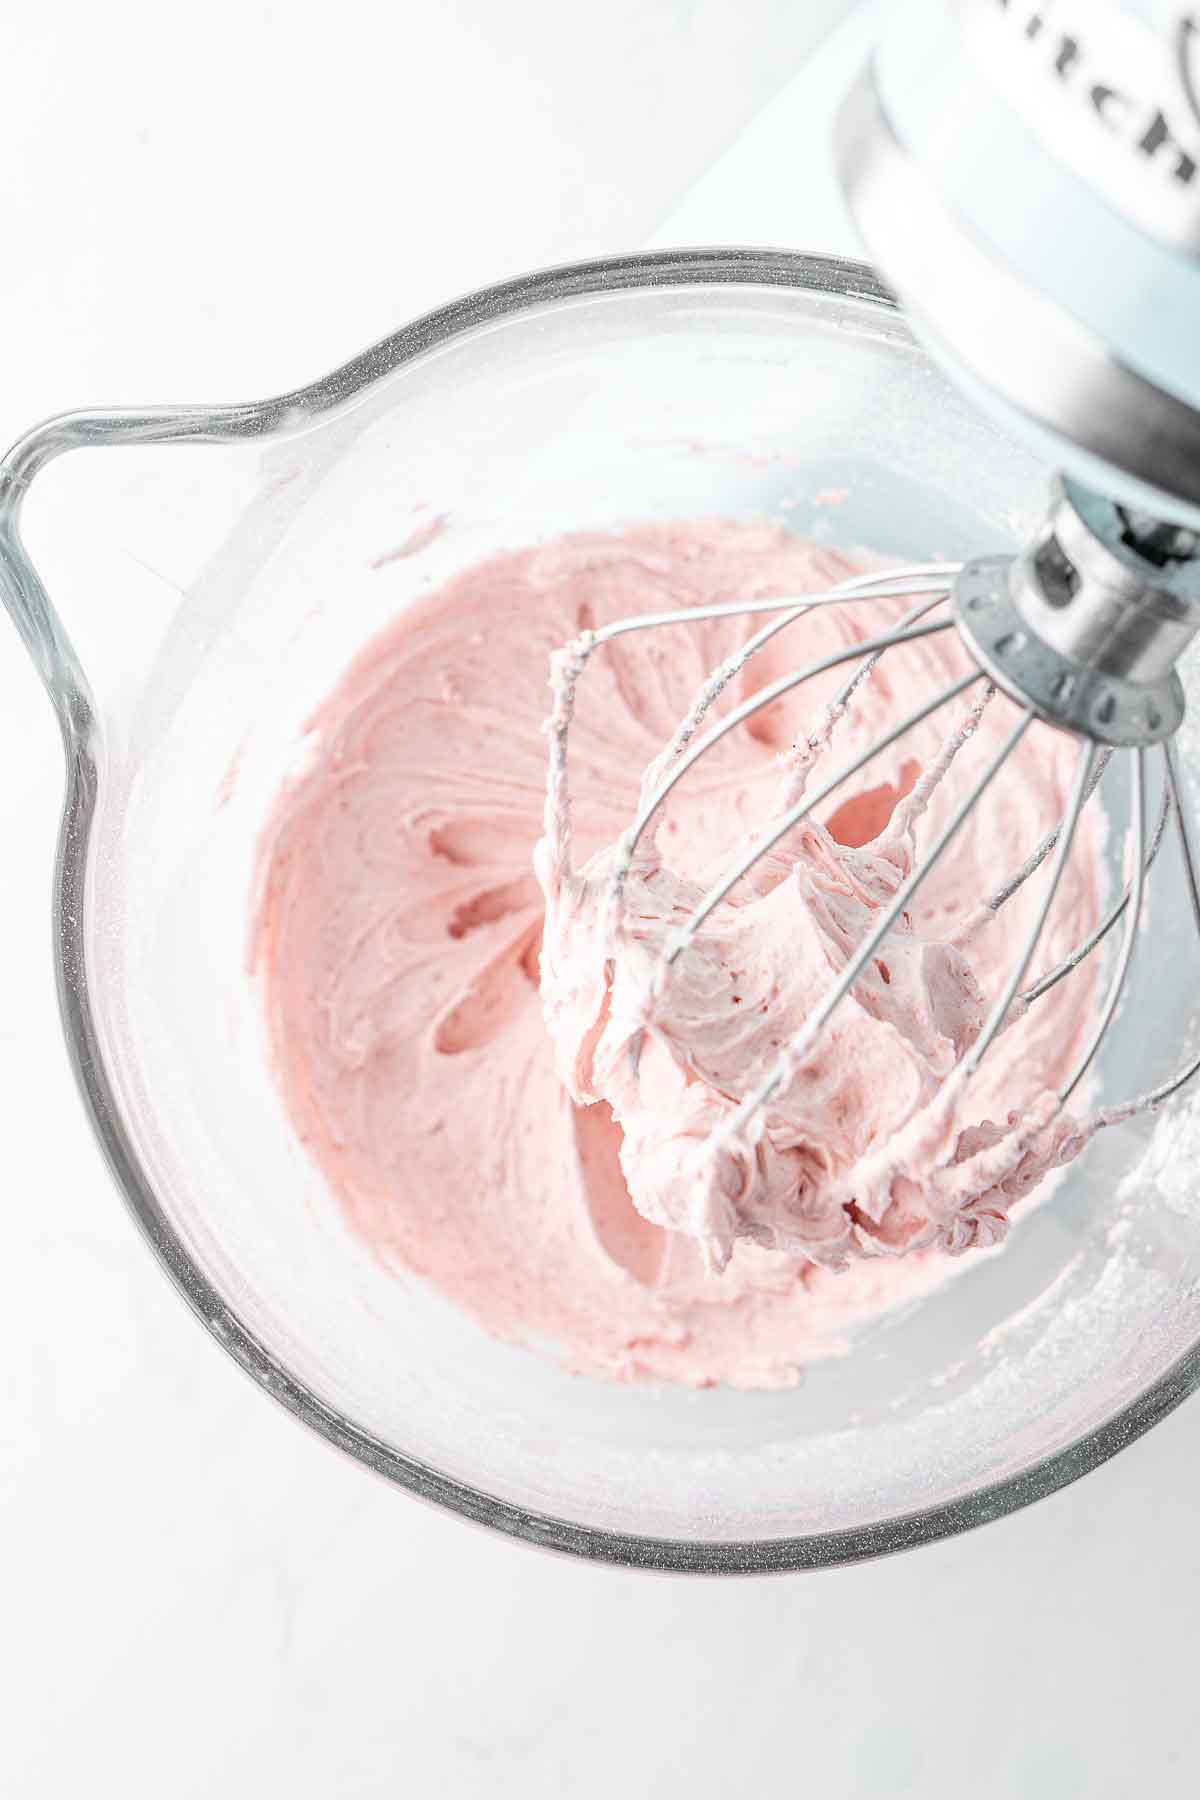 Creamy strawberry buttercream in a stand mixer with a whisk attachement.